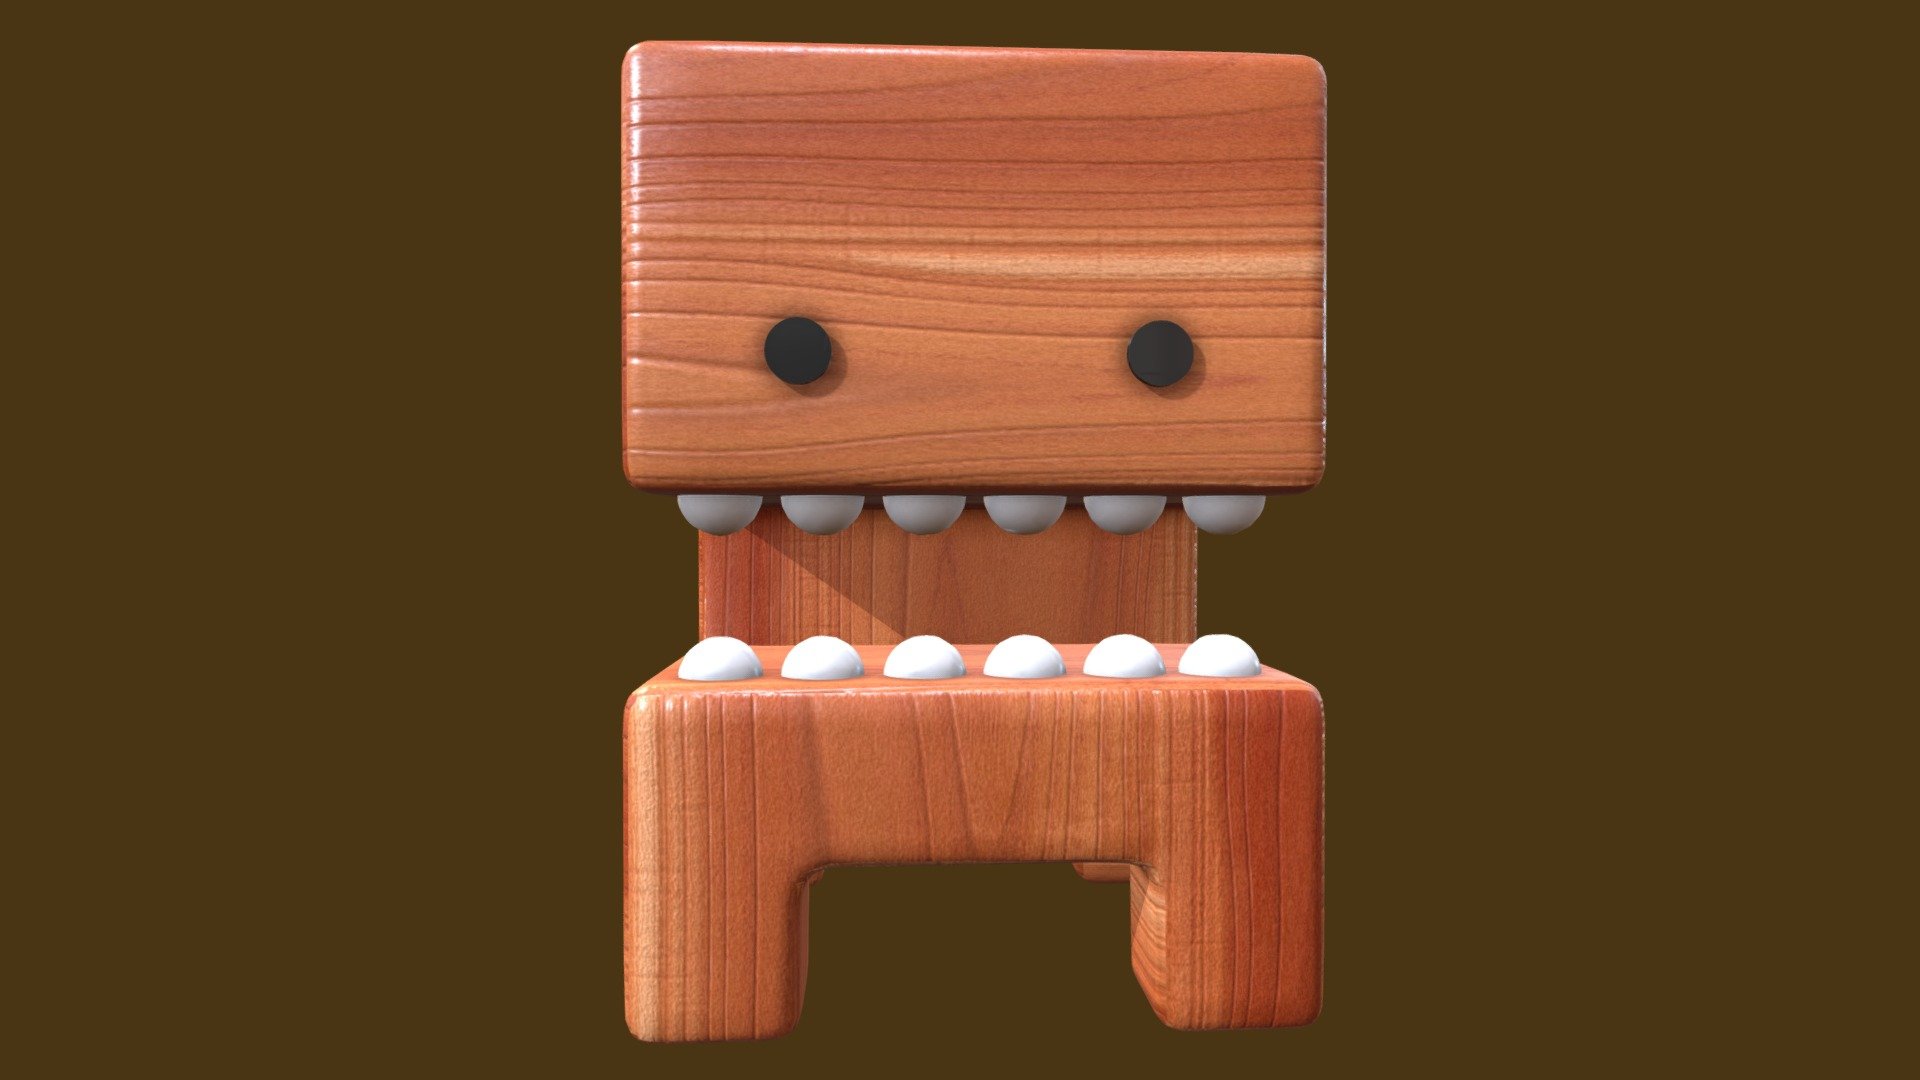 Little wood toy with 3ds Max and Substance Painter.
Free Download.
An original concept by Pepe Hiller 3d model